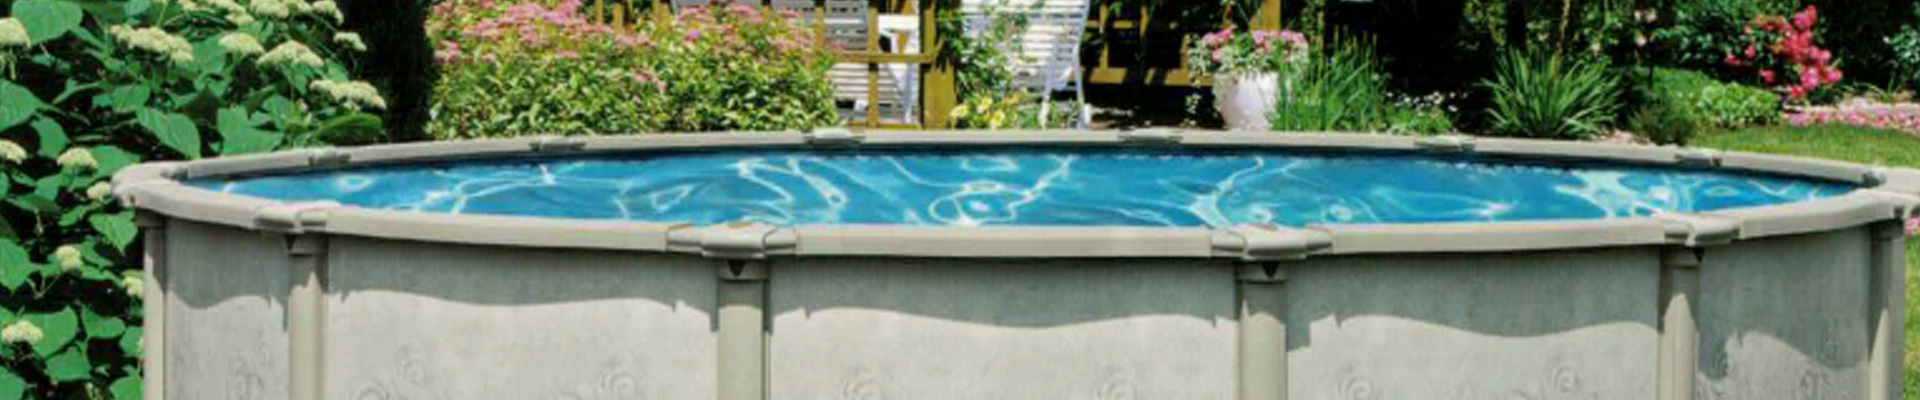 Infinity/Inspiration Above Ground Pools